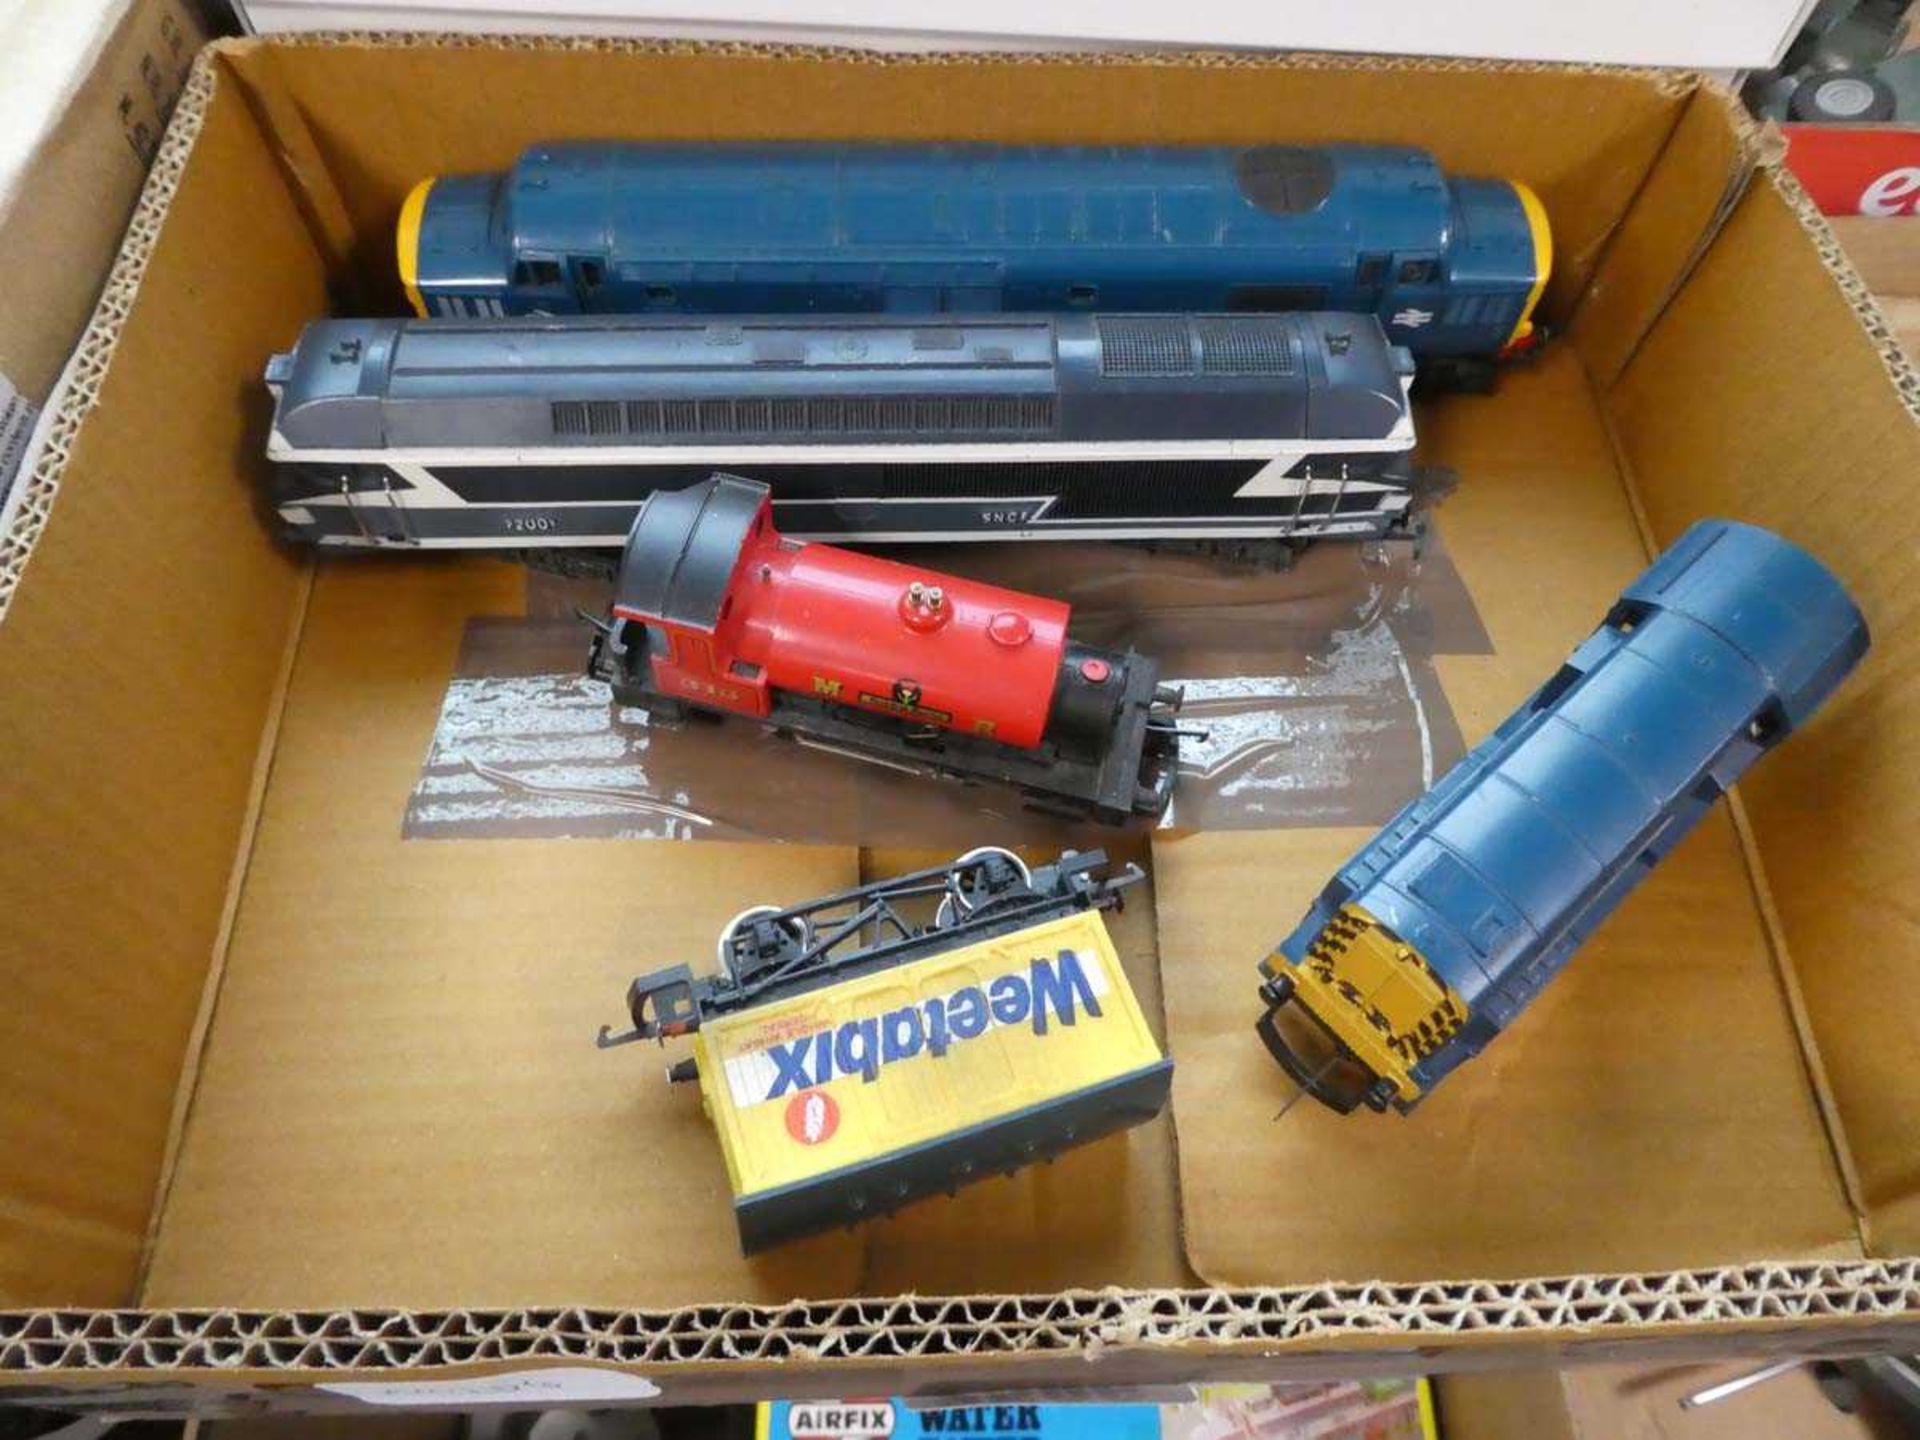 Box containing model trains and 1 carriage